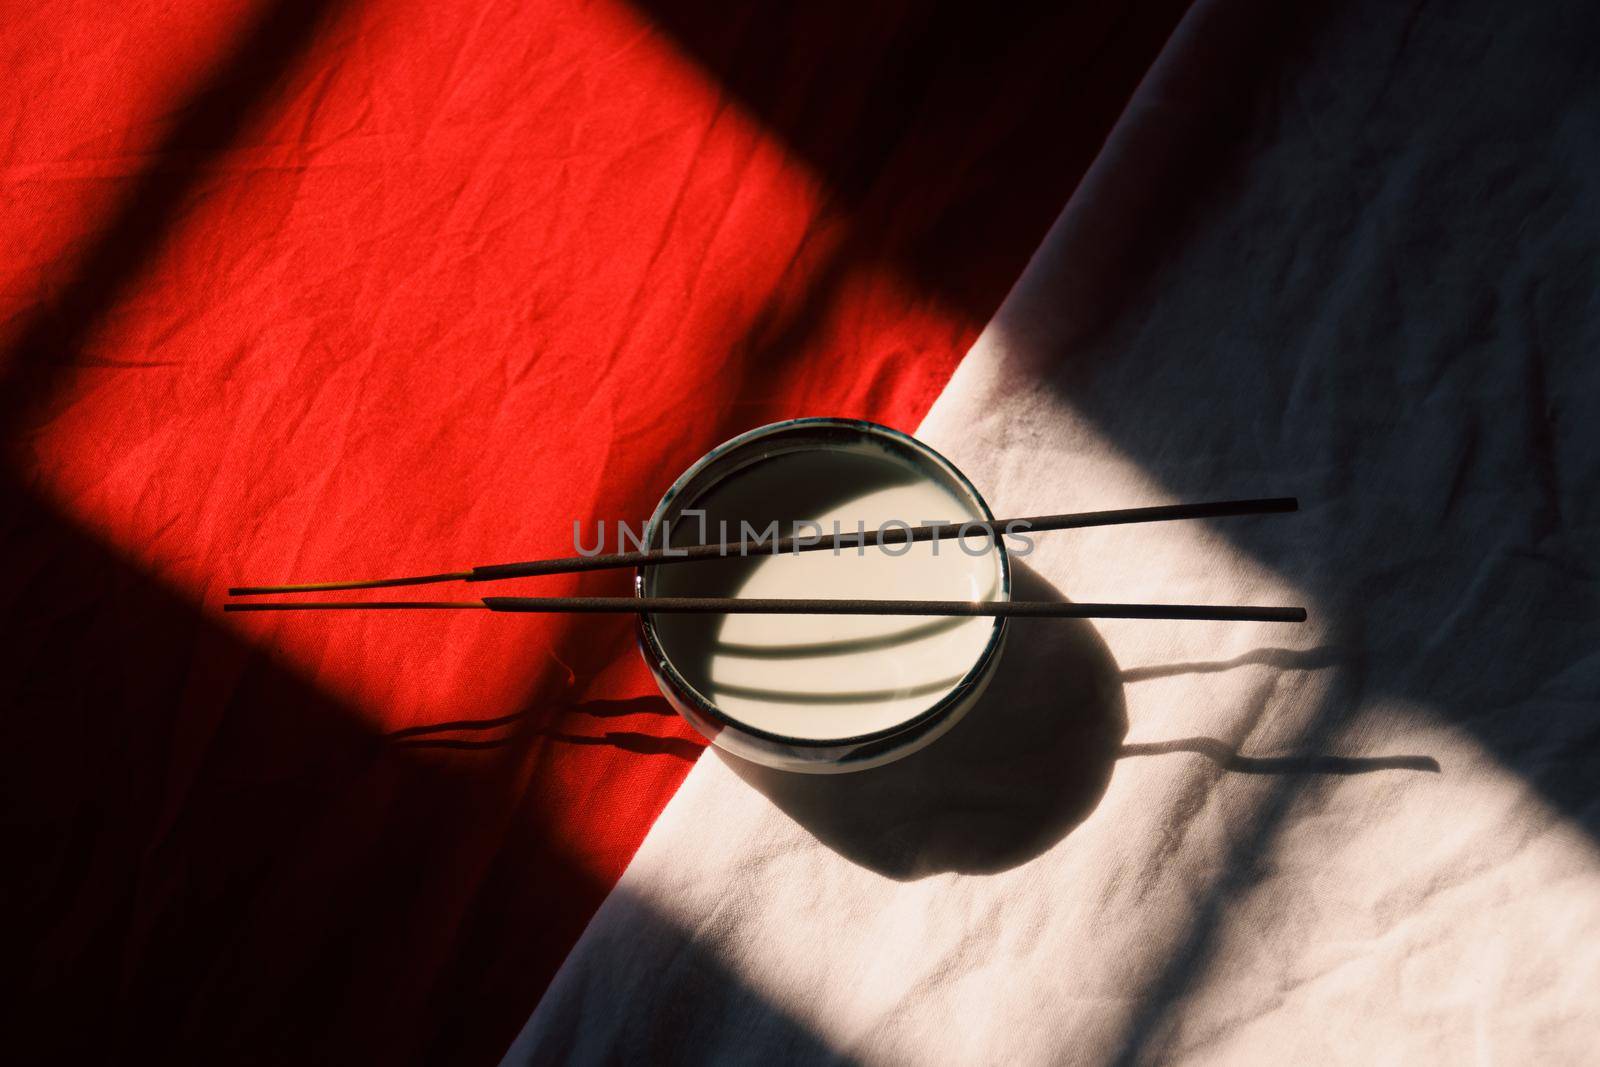 Light and shadows cast on a ceramic incense holder and sticks showing zen, wellness and mindfulness